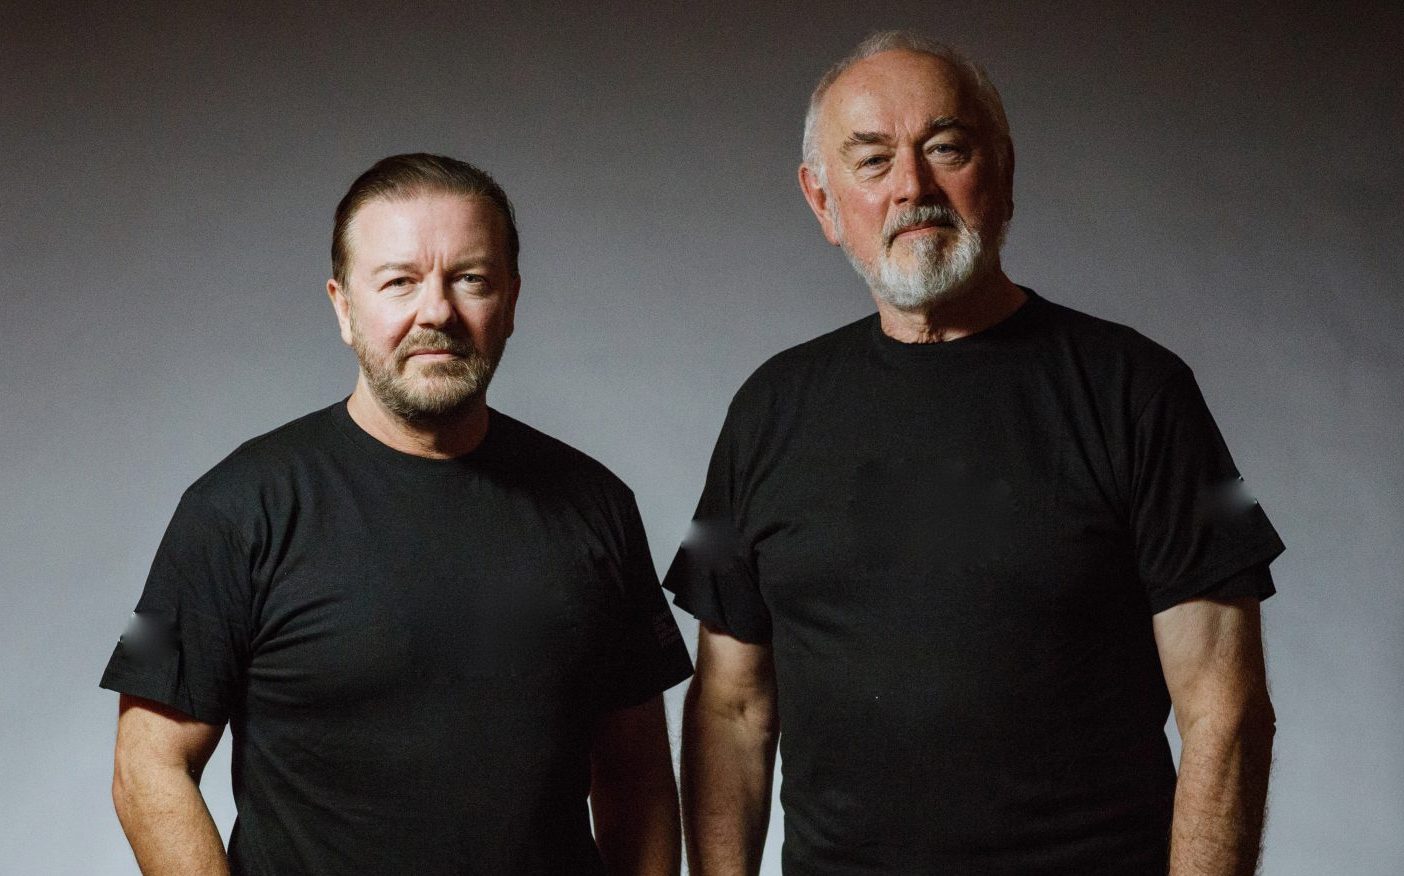 Ricky Gervais, Peter Egan, Ellen DeGeneres and 90 Other Celebrities Join the Call to End Brutal Dog Meat Trade